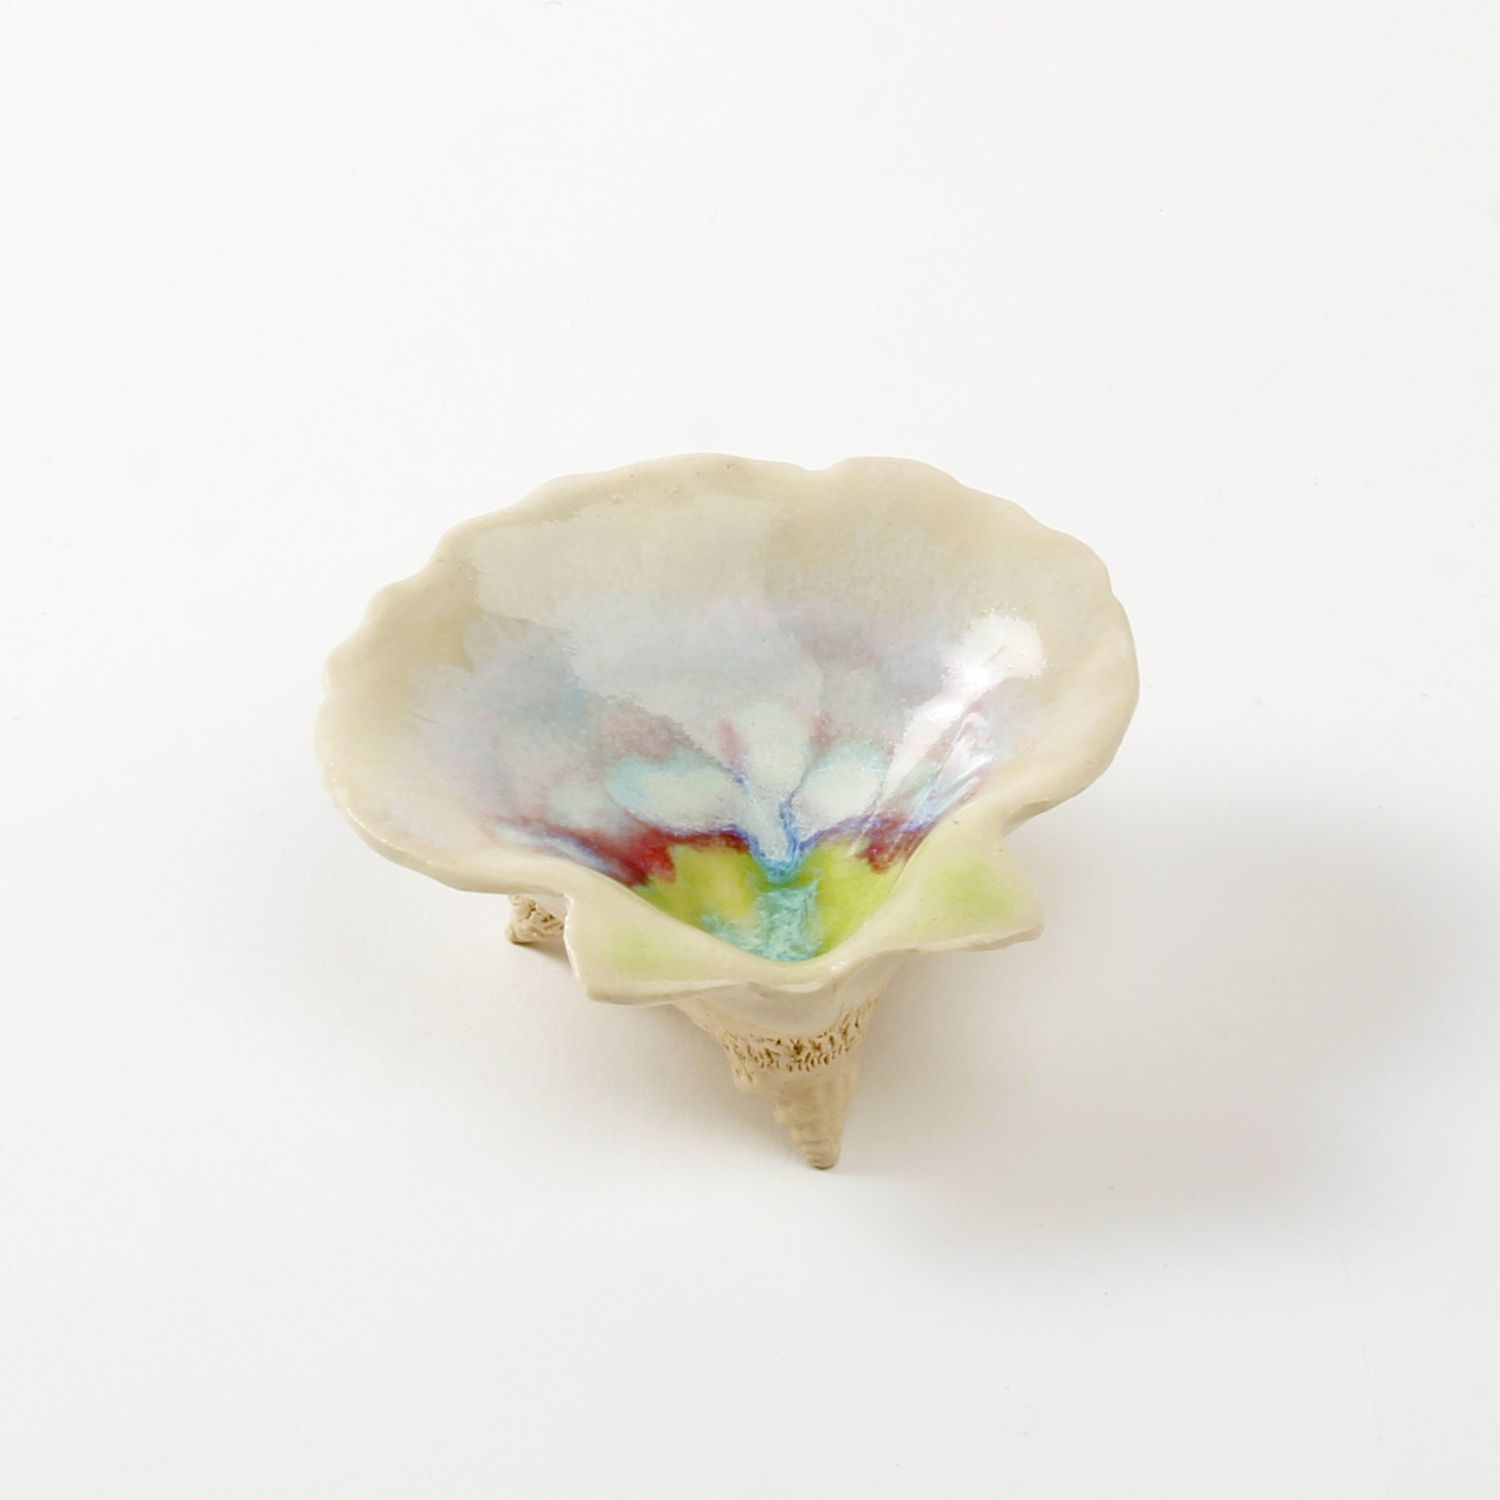 Brenda Nieves: Small Clam Plate Product Image 3 of 4